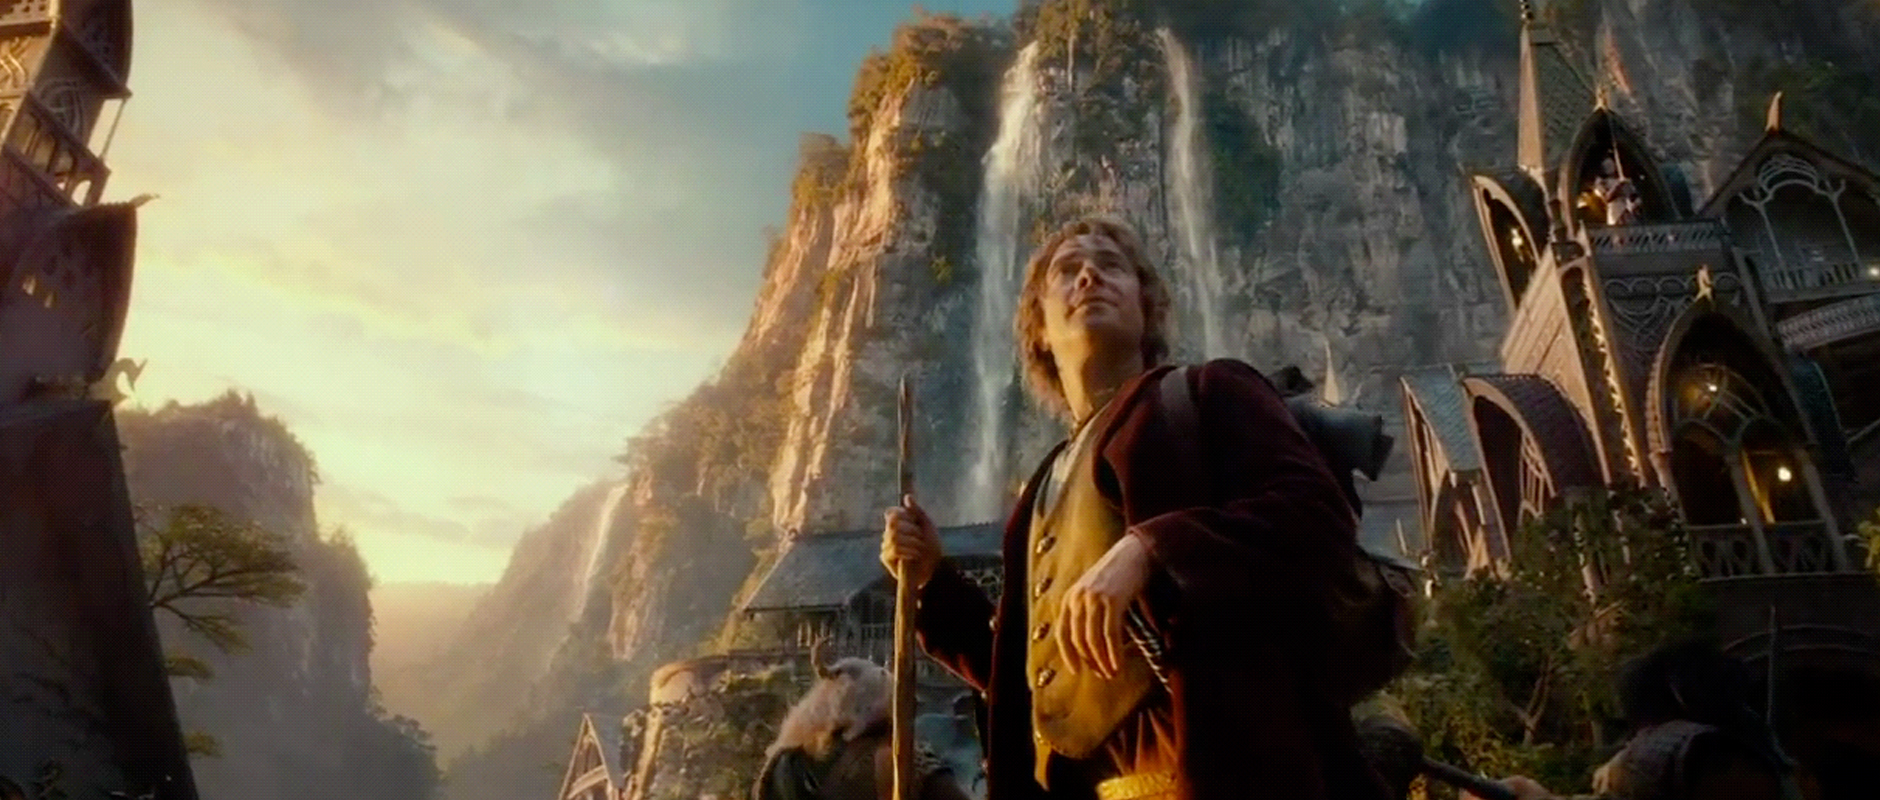 Hero image for The Hobbit: An Unexpected Journey